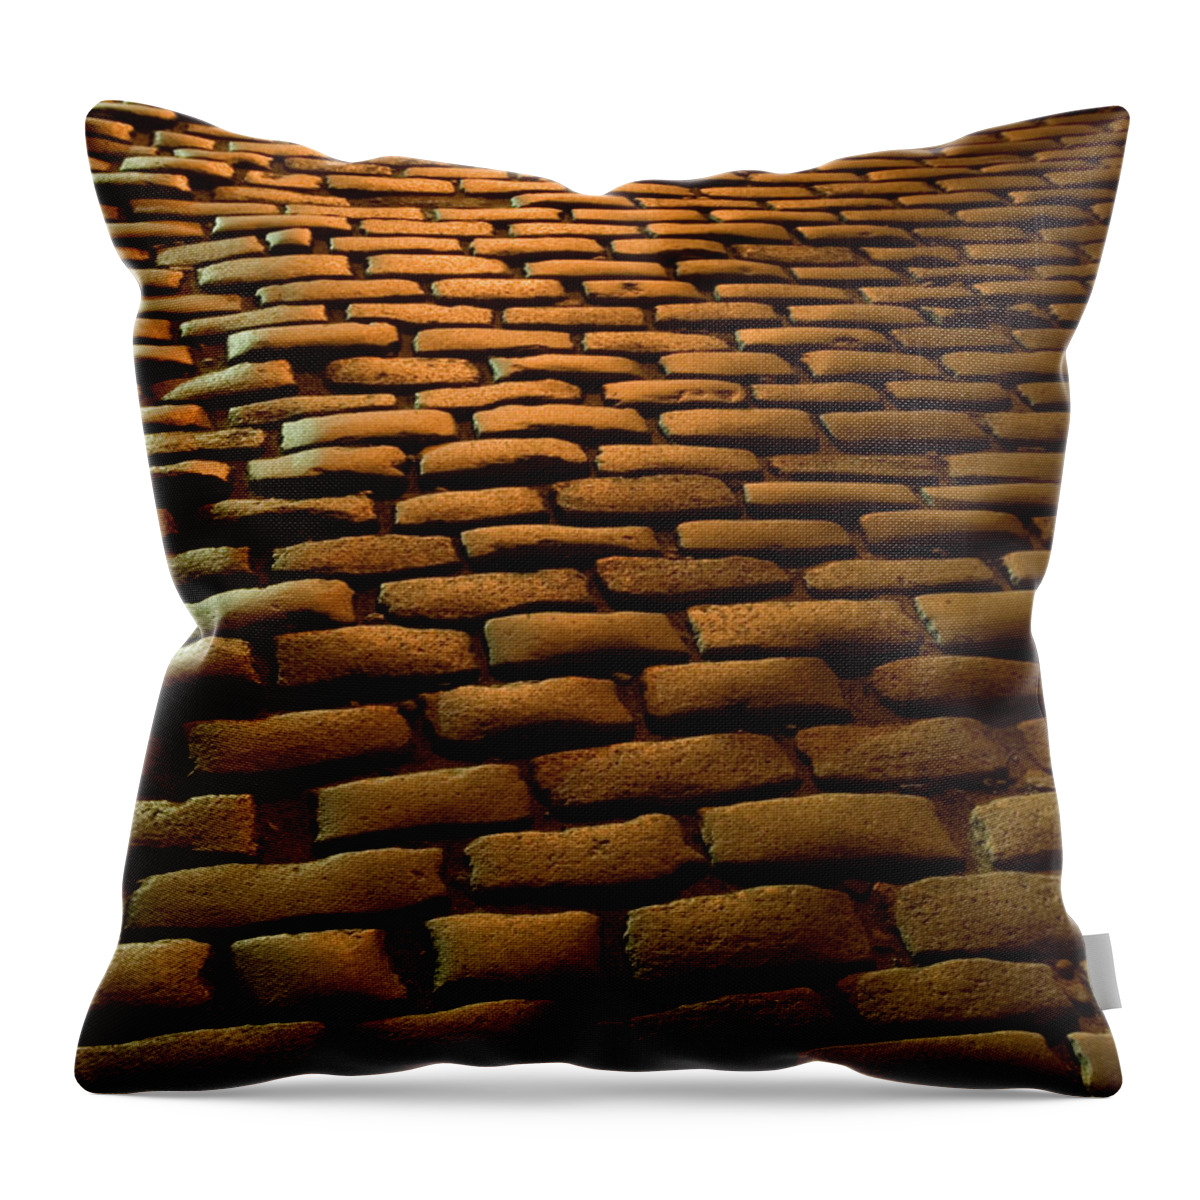 Outdoors Throw Pillow featuring the photograph Close-up Of Cobblestone Street At Night by Jeff Spielman